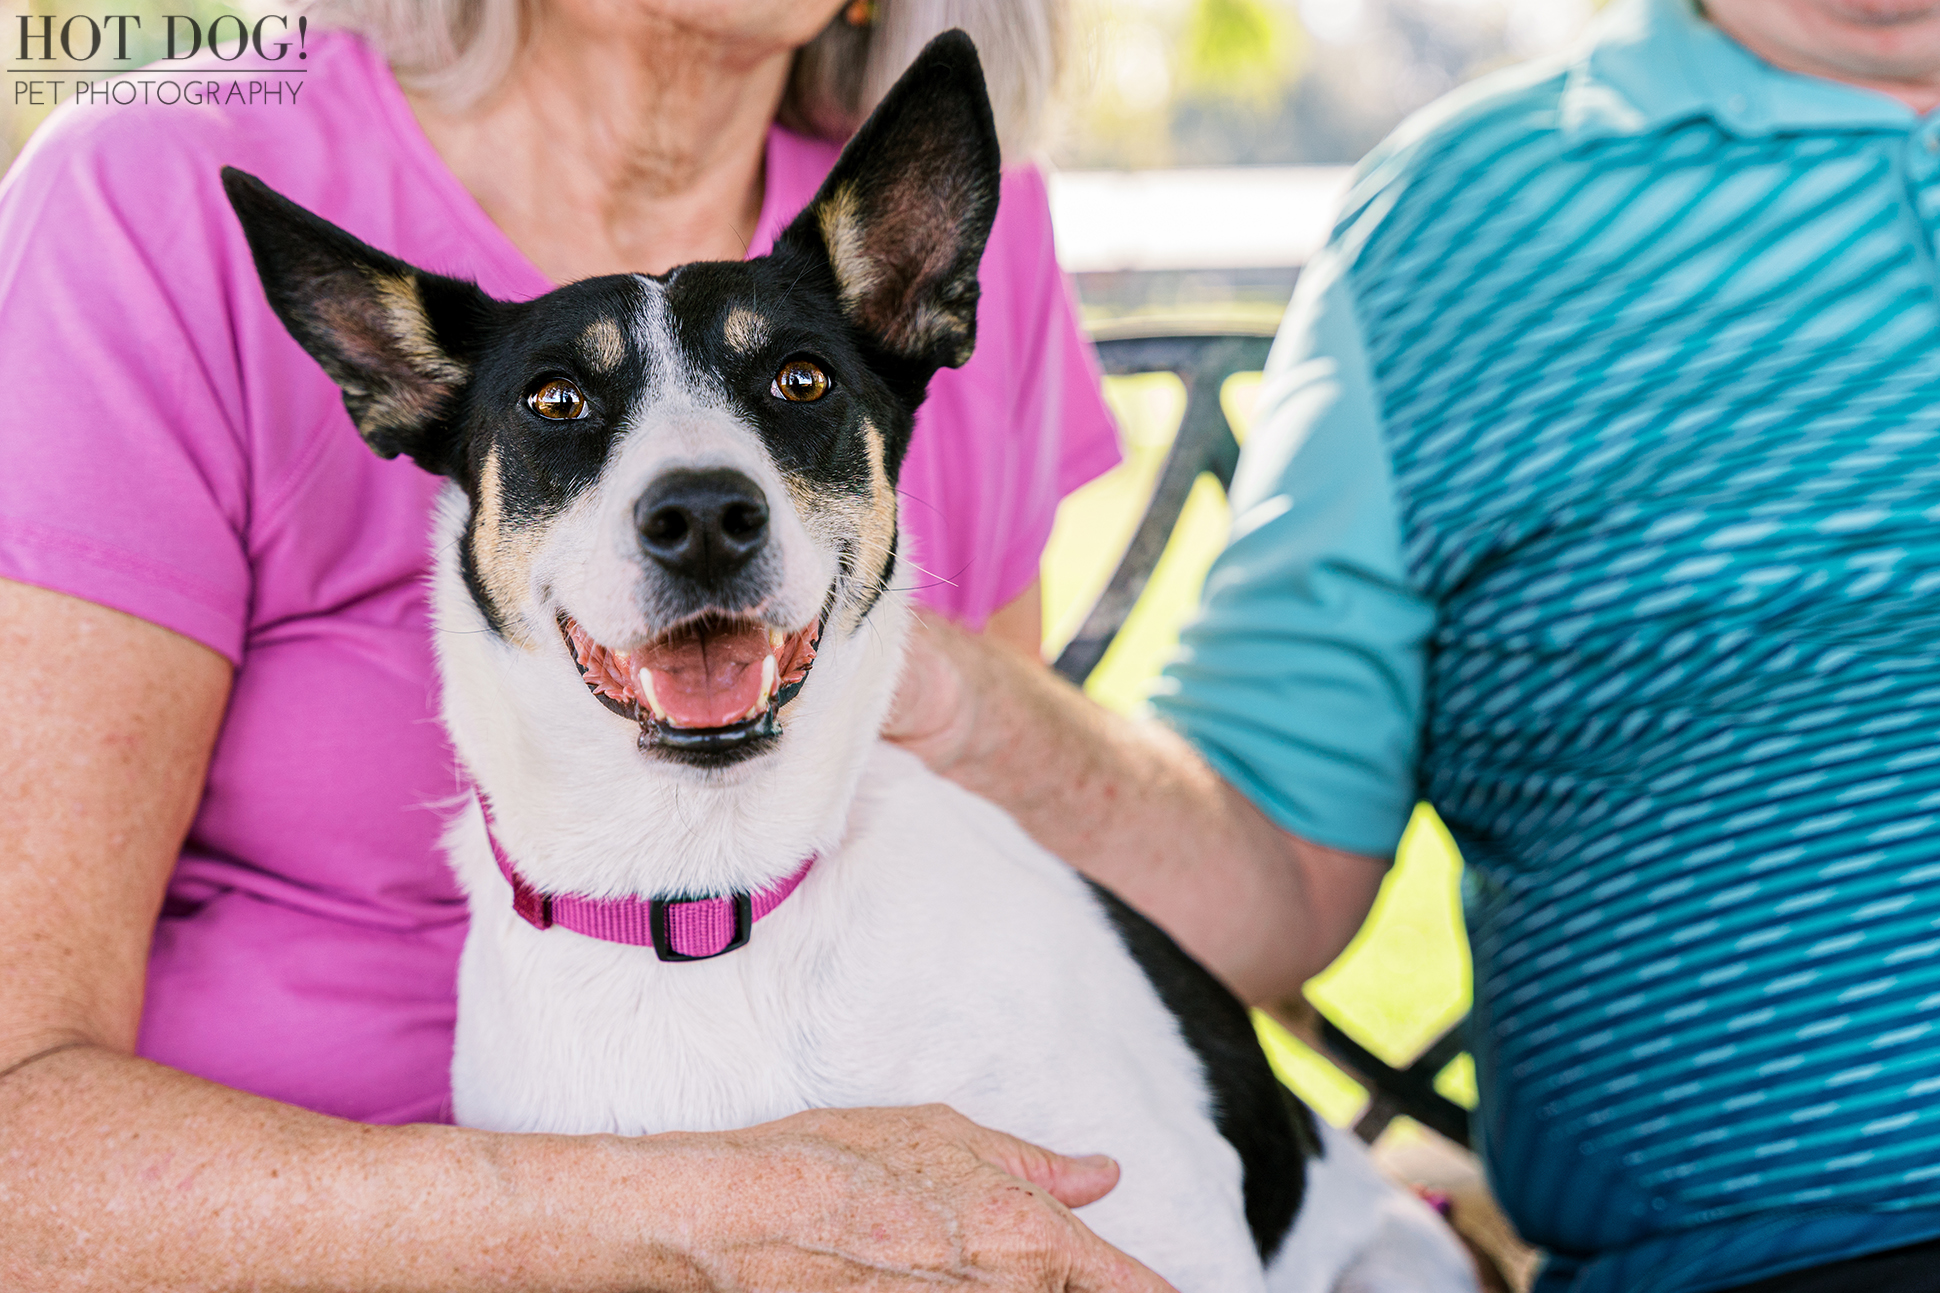 Family Forever: A heartwarming portrait of rescued rat terrier mix Miracle nestled between her doting parents, their bond radiating in this Orlando pet photography session by Hot Dog! Pet Photography.